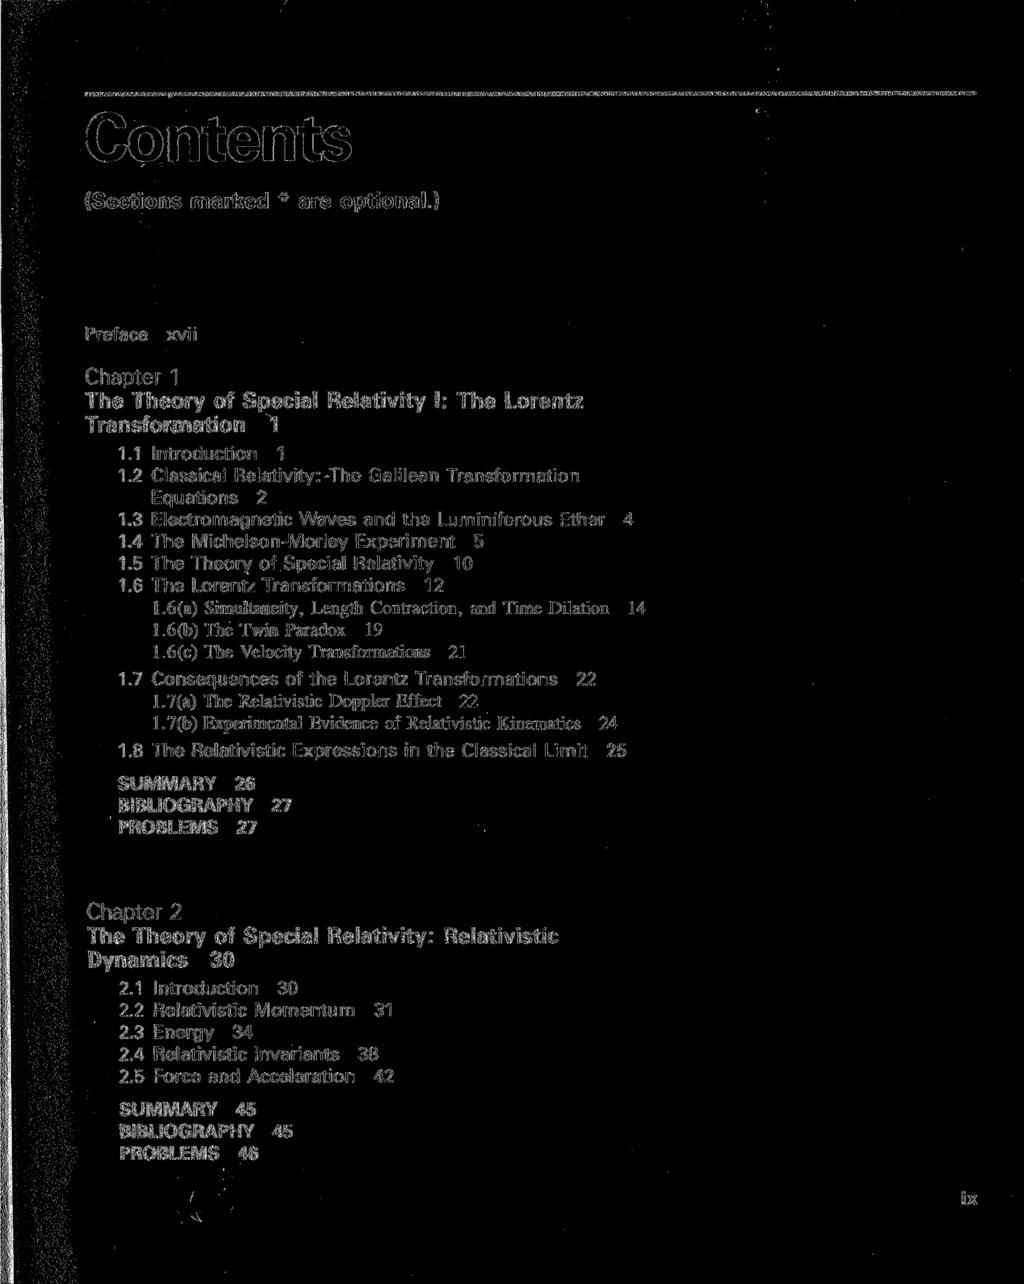 Contents (Sections marked * are optional.) Preface xvii Chapter 1 The Theory of Special Relativity I: The Lorentz Transformation 1 1.1 Introduction 1 1.